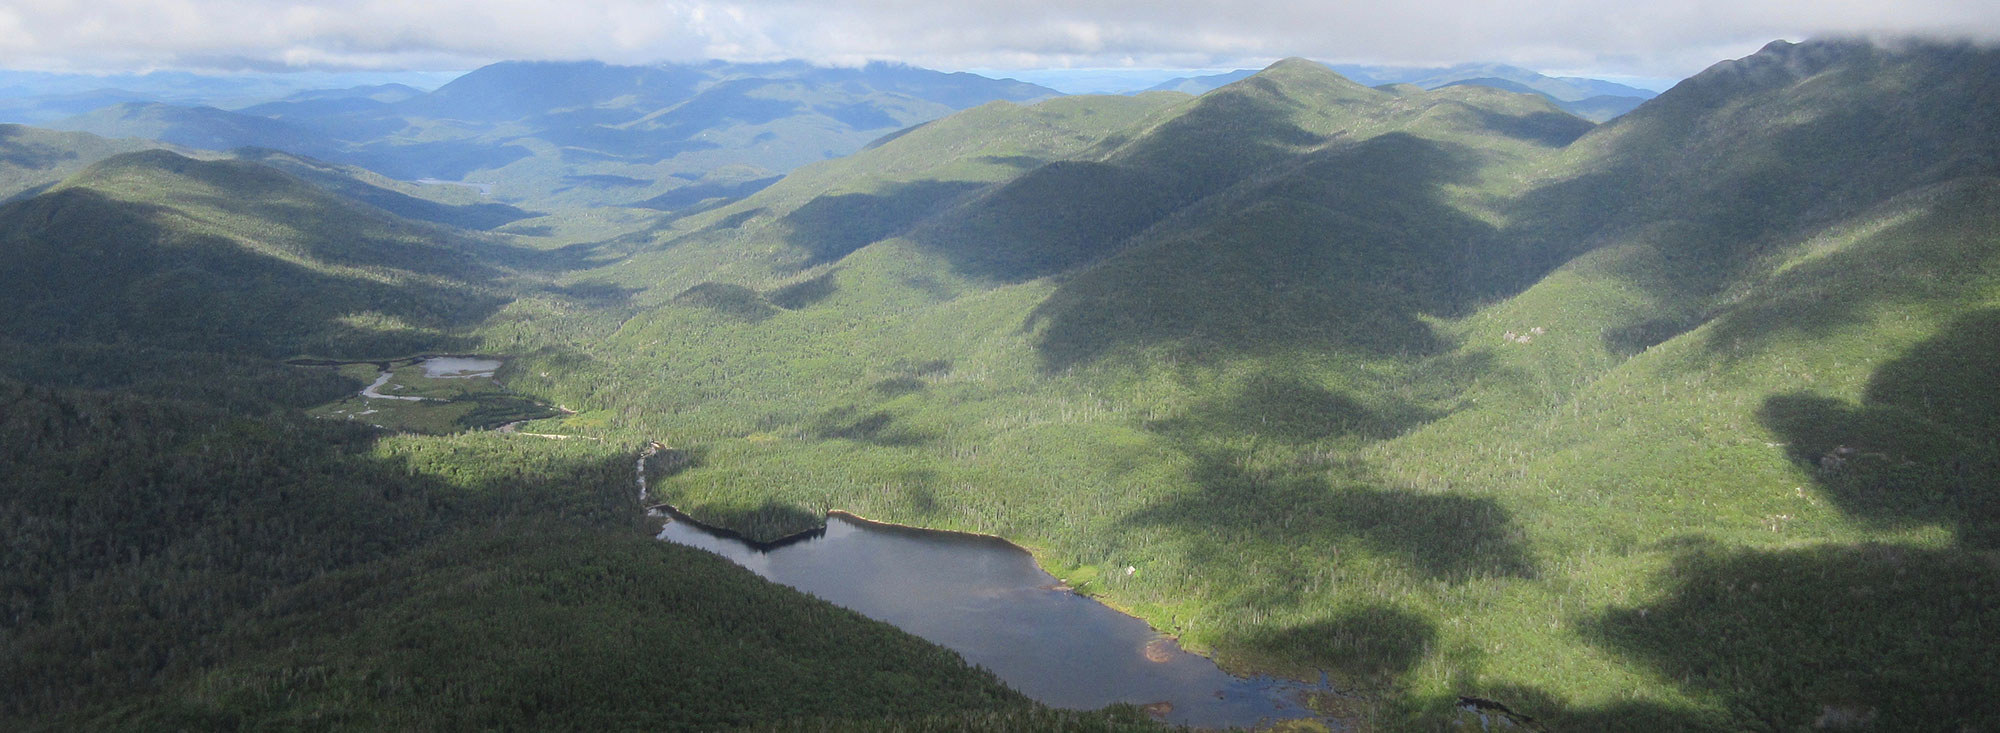 Adirondack Mountains  and a lake from the air